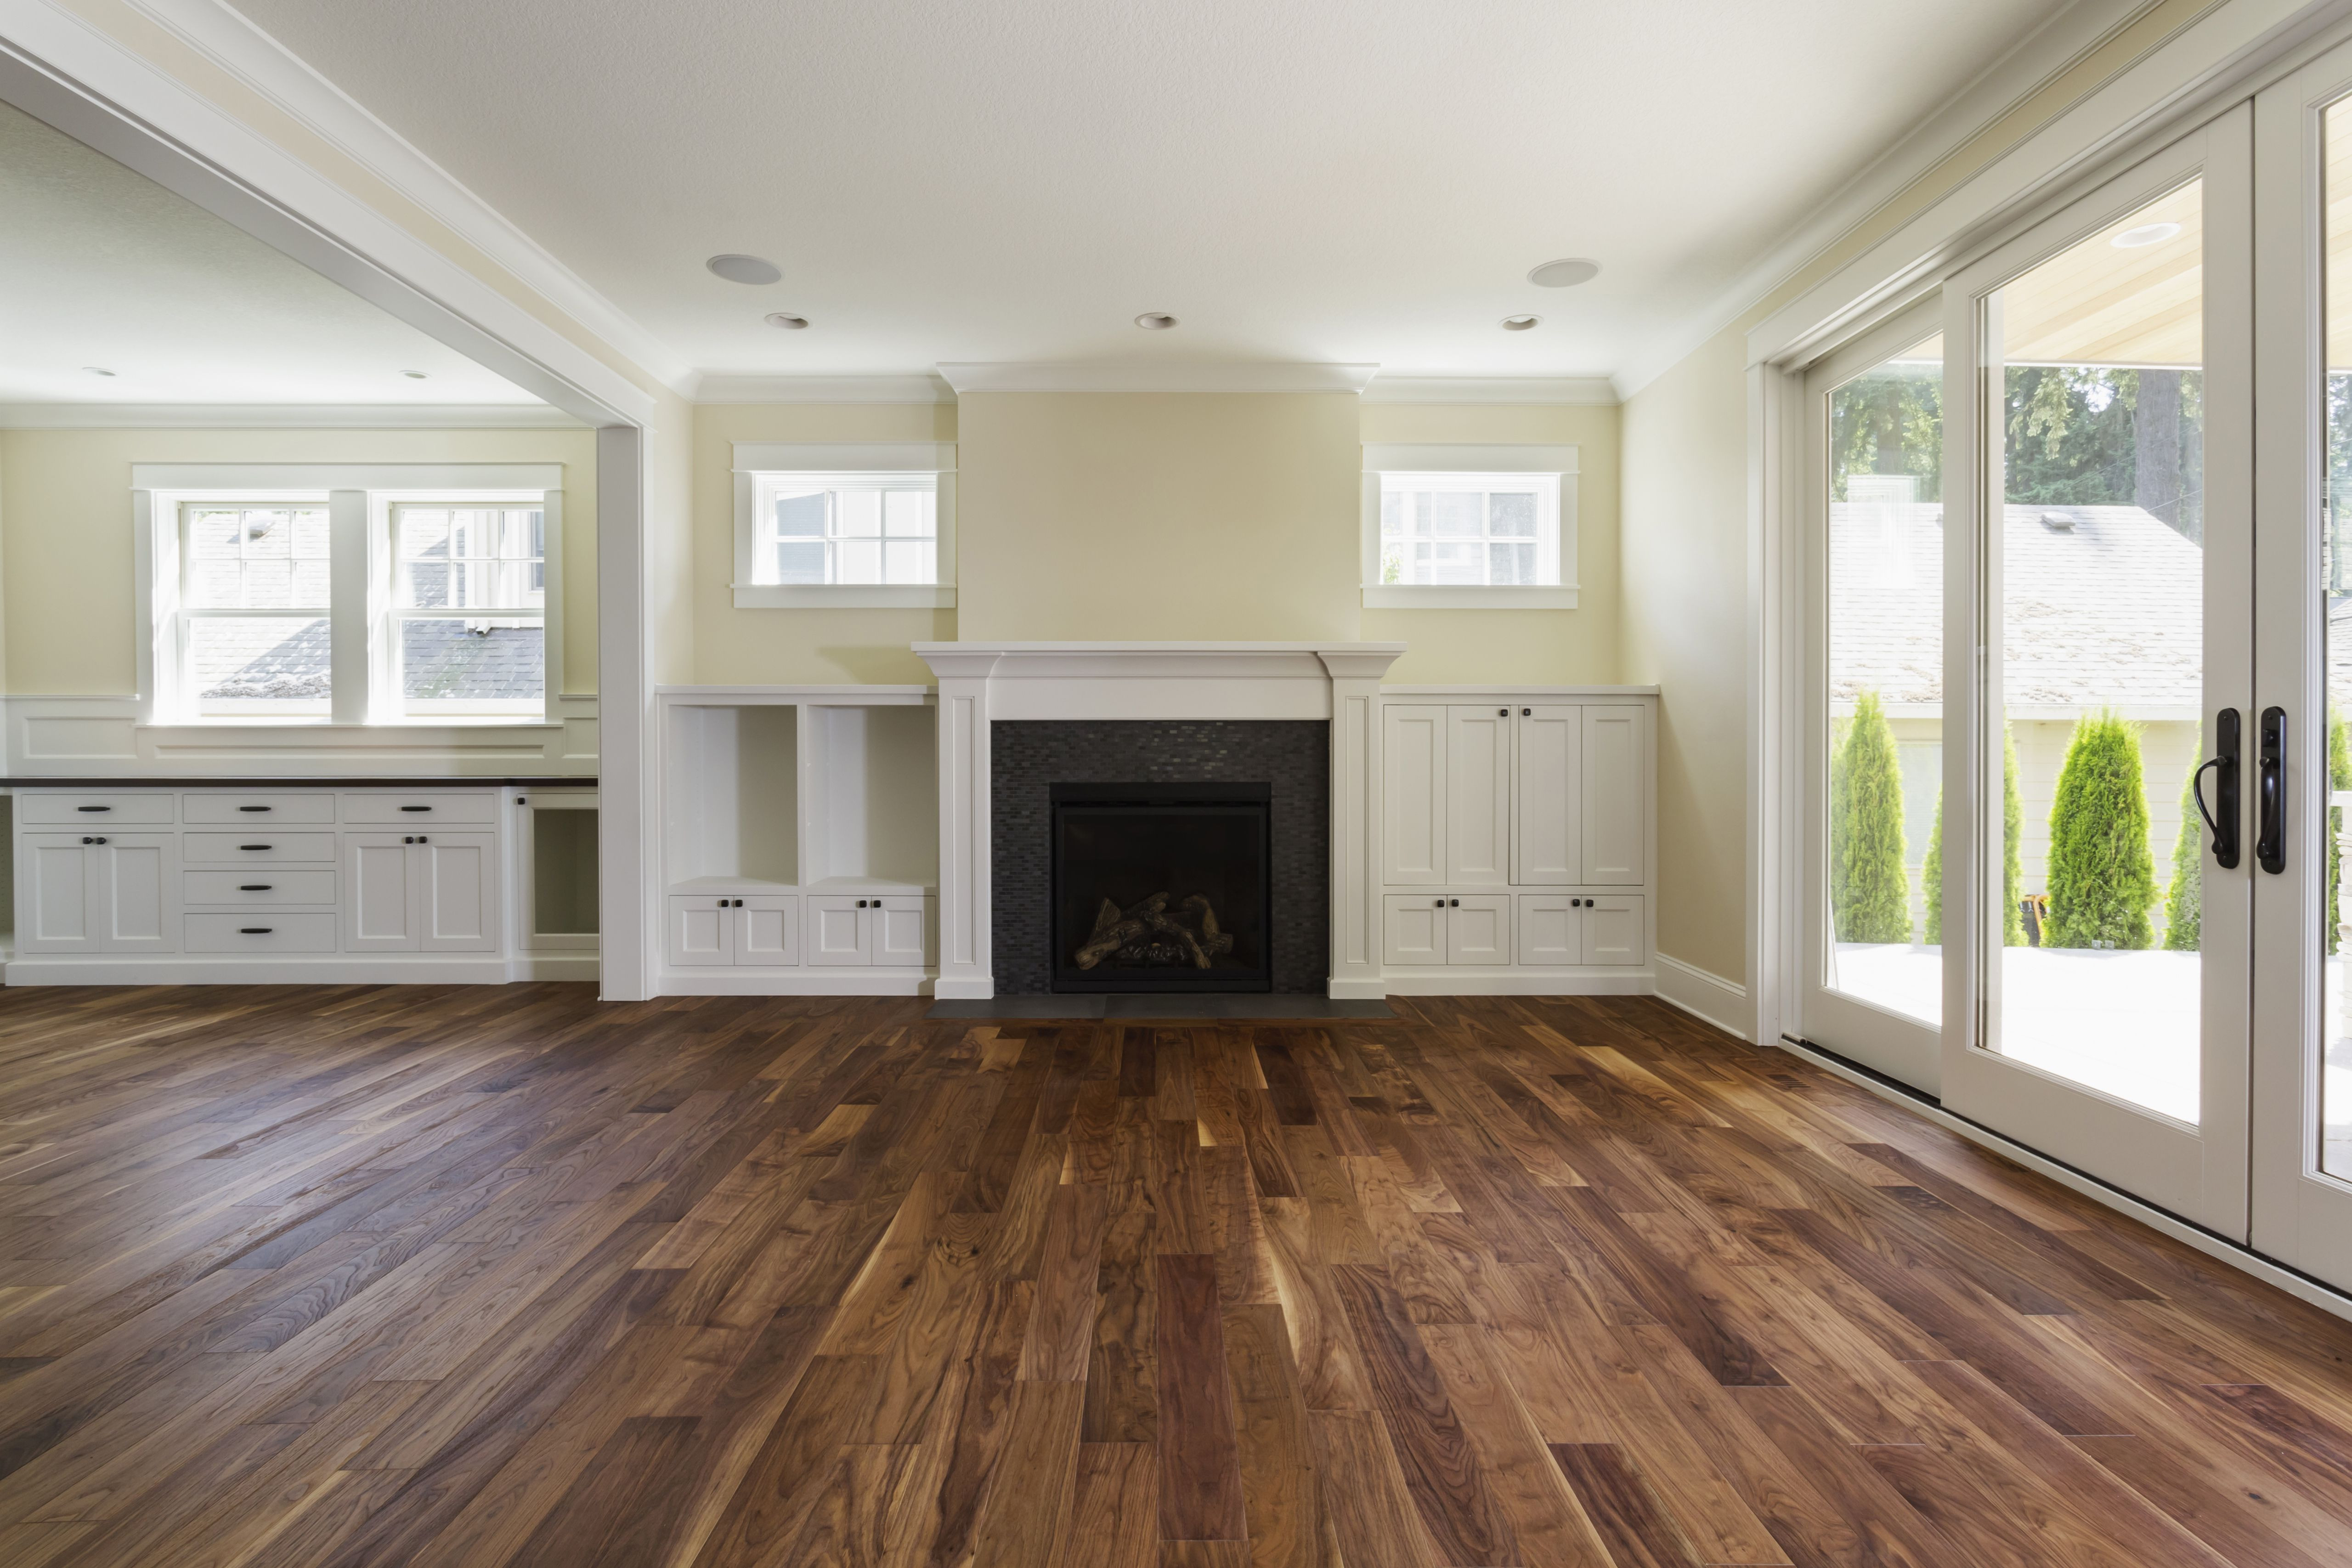 14 Recommended Cost to Install Oak Hardwood Floors 2024 free download cost to install oak hardwood floors of the pros and cons of prefinished hardwood flooring with fireplace and built in shelves in living room 482143011 57bef8e33df78cc16e035397